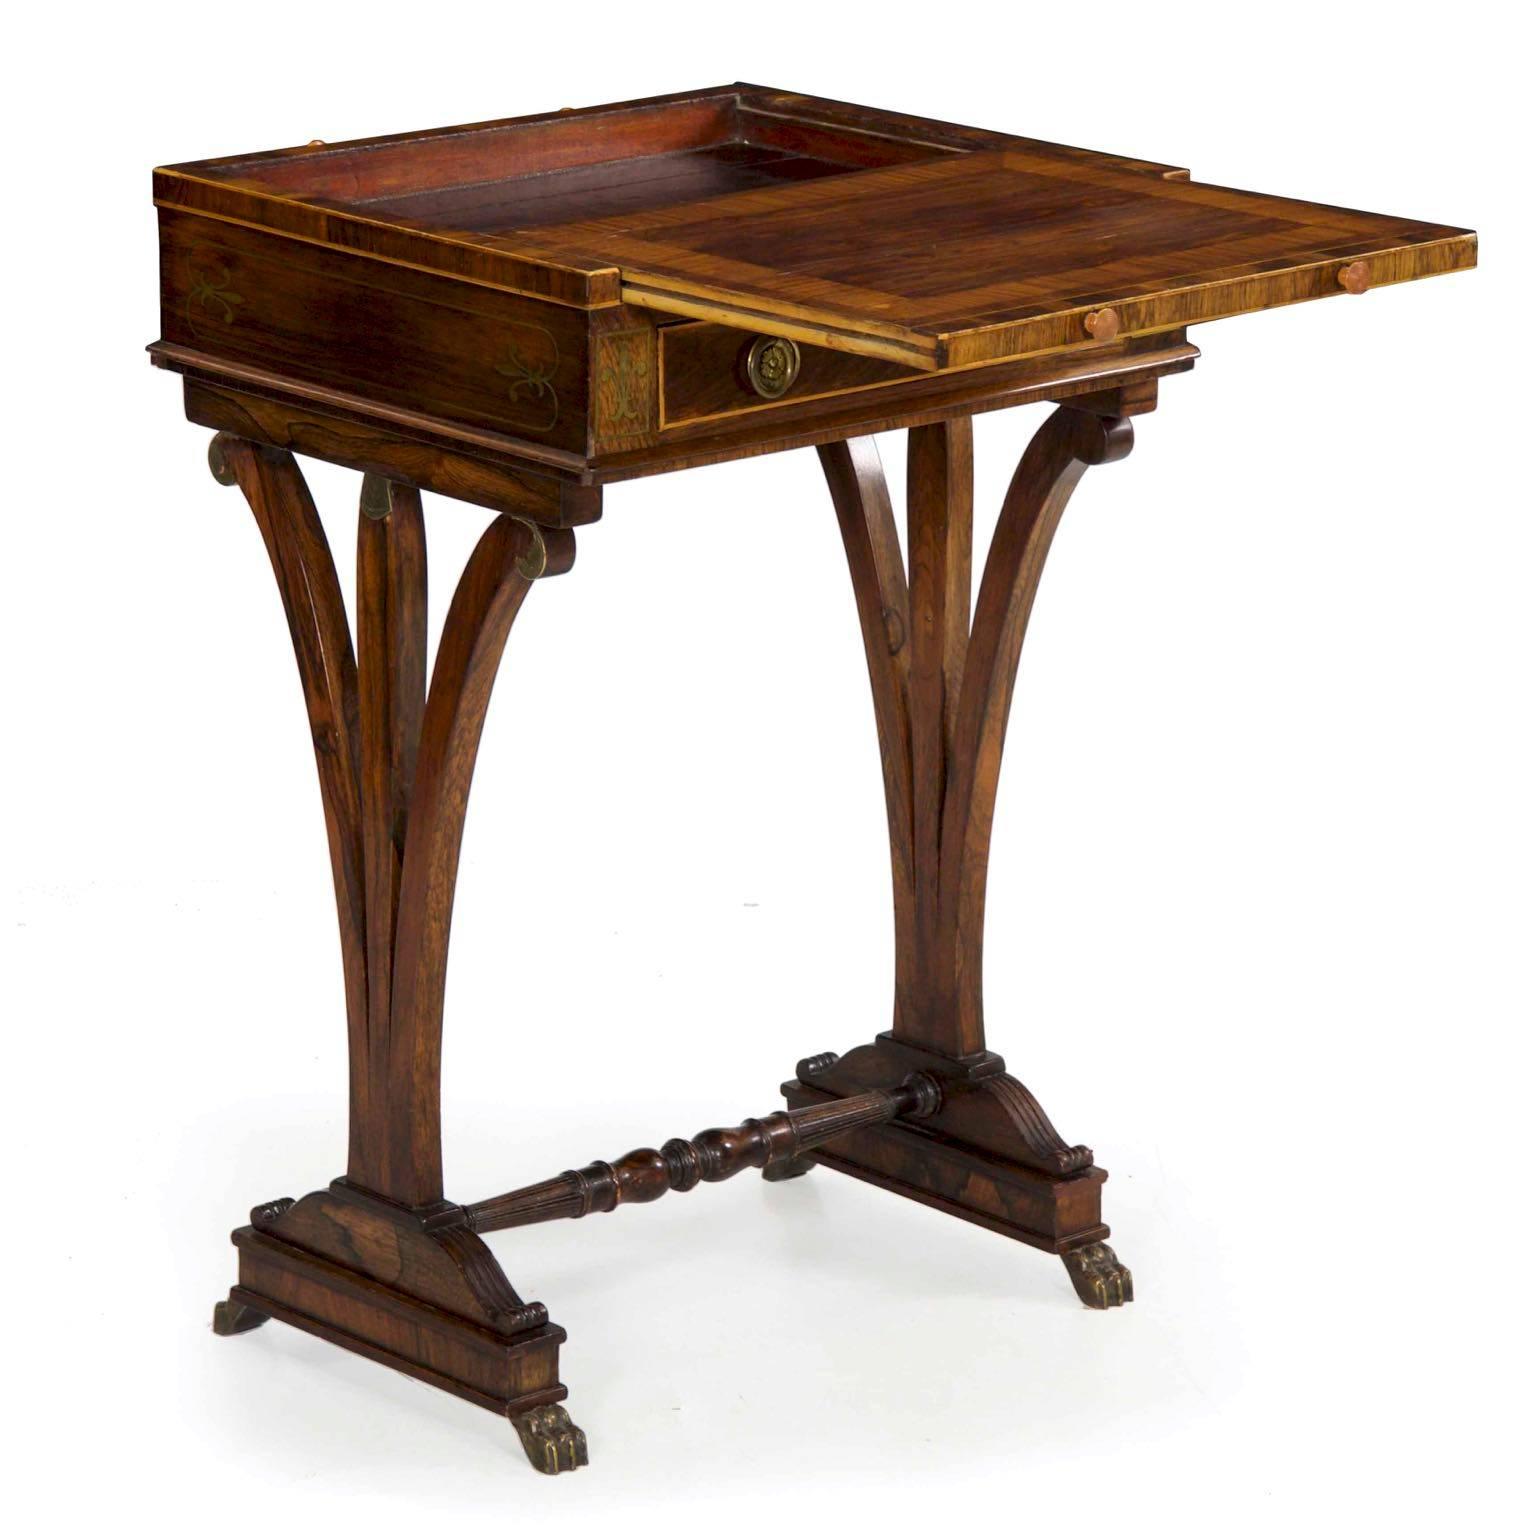 Such an unusual and intricate little beauty, this gorgeous antique writing desk doubles as a small console or accent table when not servicing as a desk. The quality is top-grade throughout with incredibly precise hand-cut dovetailing in the mahogany